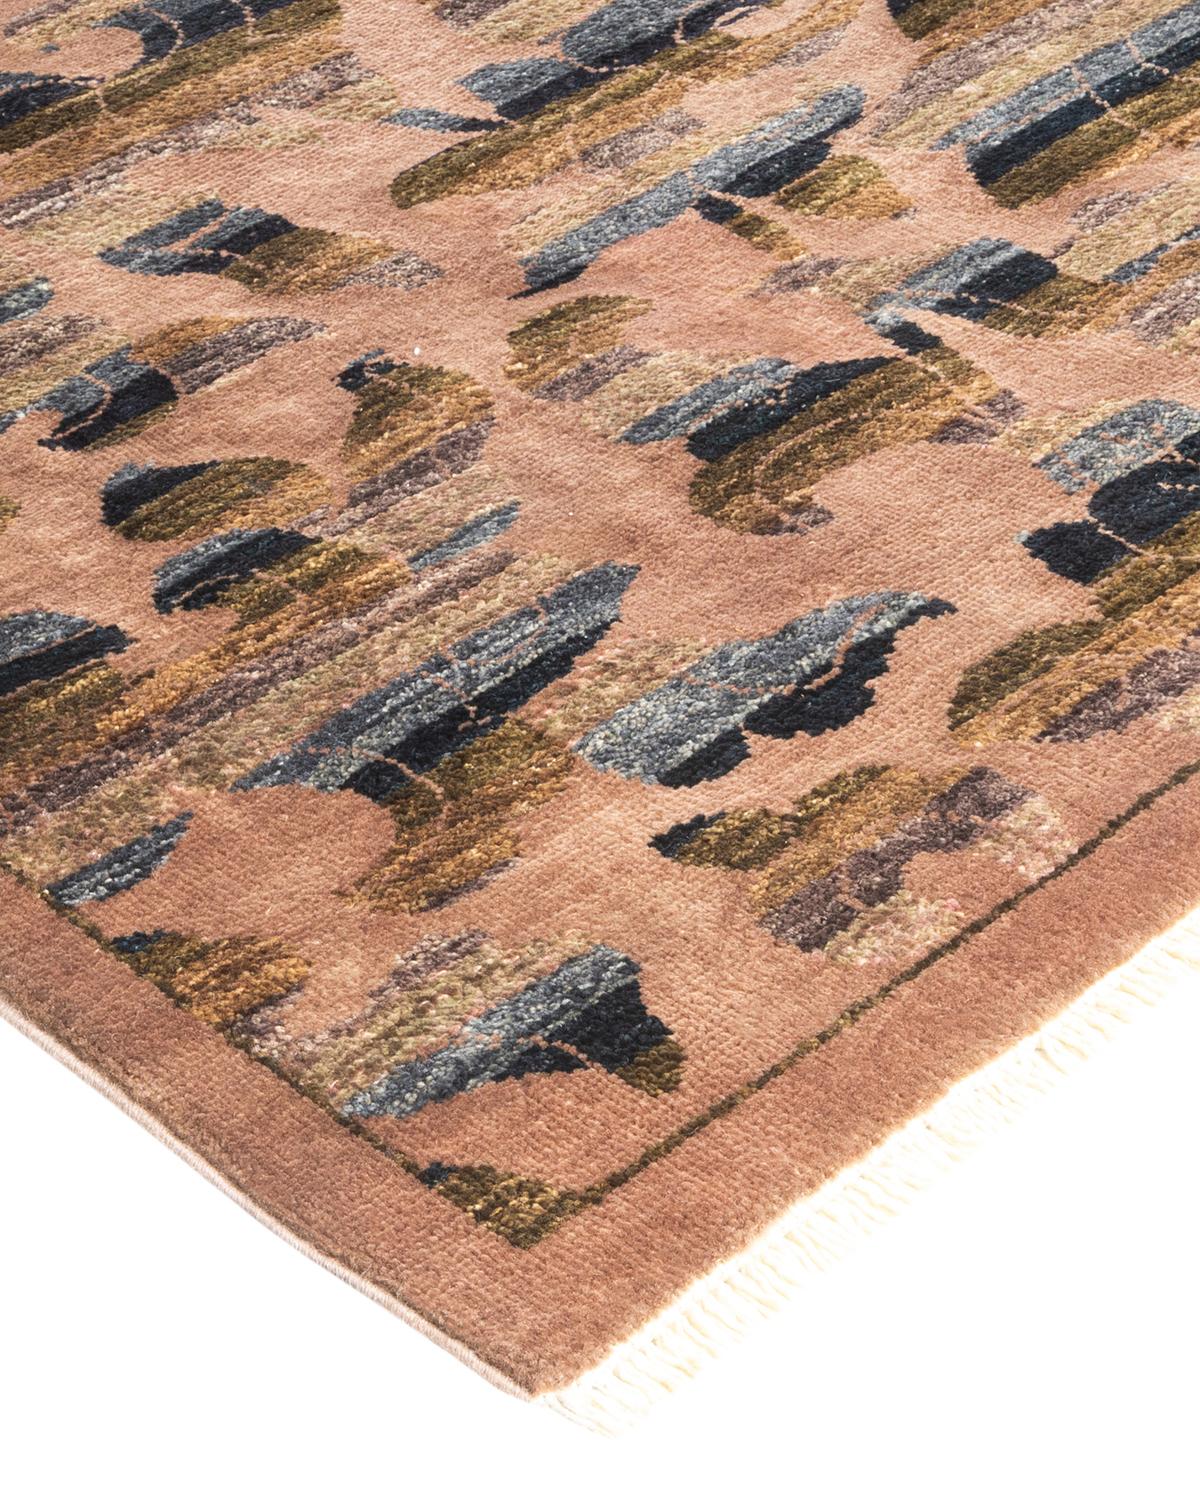 With an amalgam of sizes and aesthetic influences ranging from art deco to Rorschach and modernist, the rugs in the Eclectic collection defy definition, asking instead to become intriguing focal points of a room. They are at once statement pieces